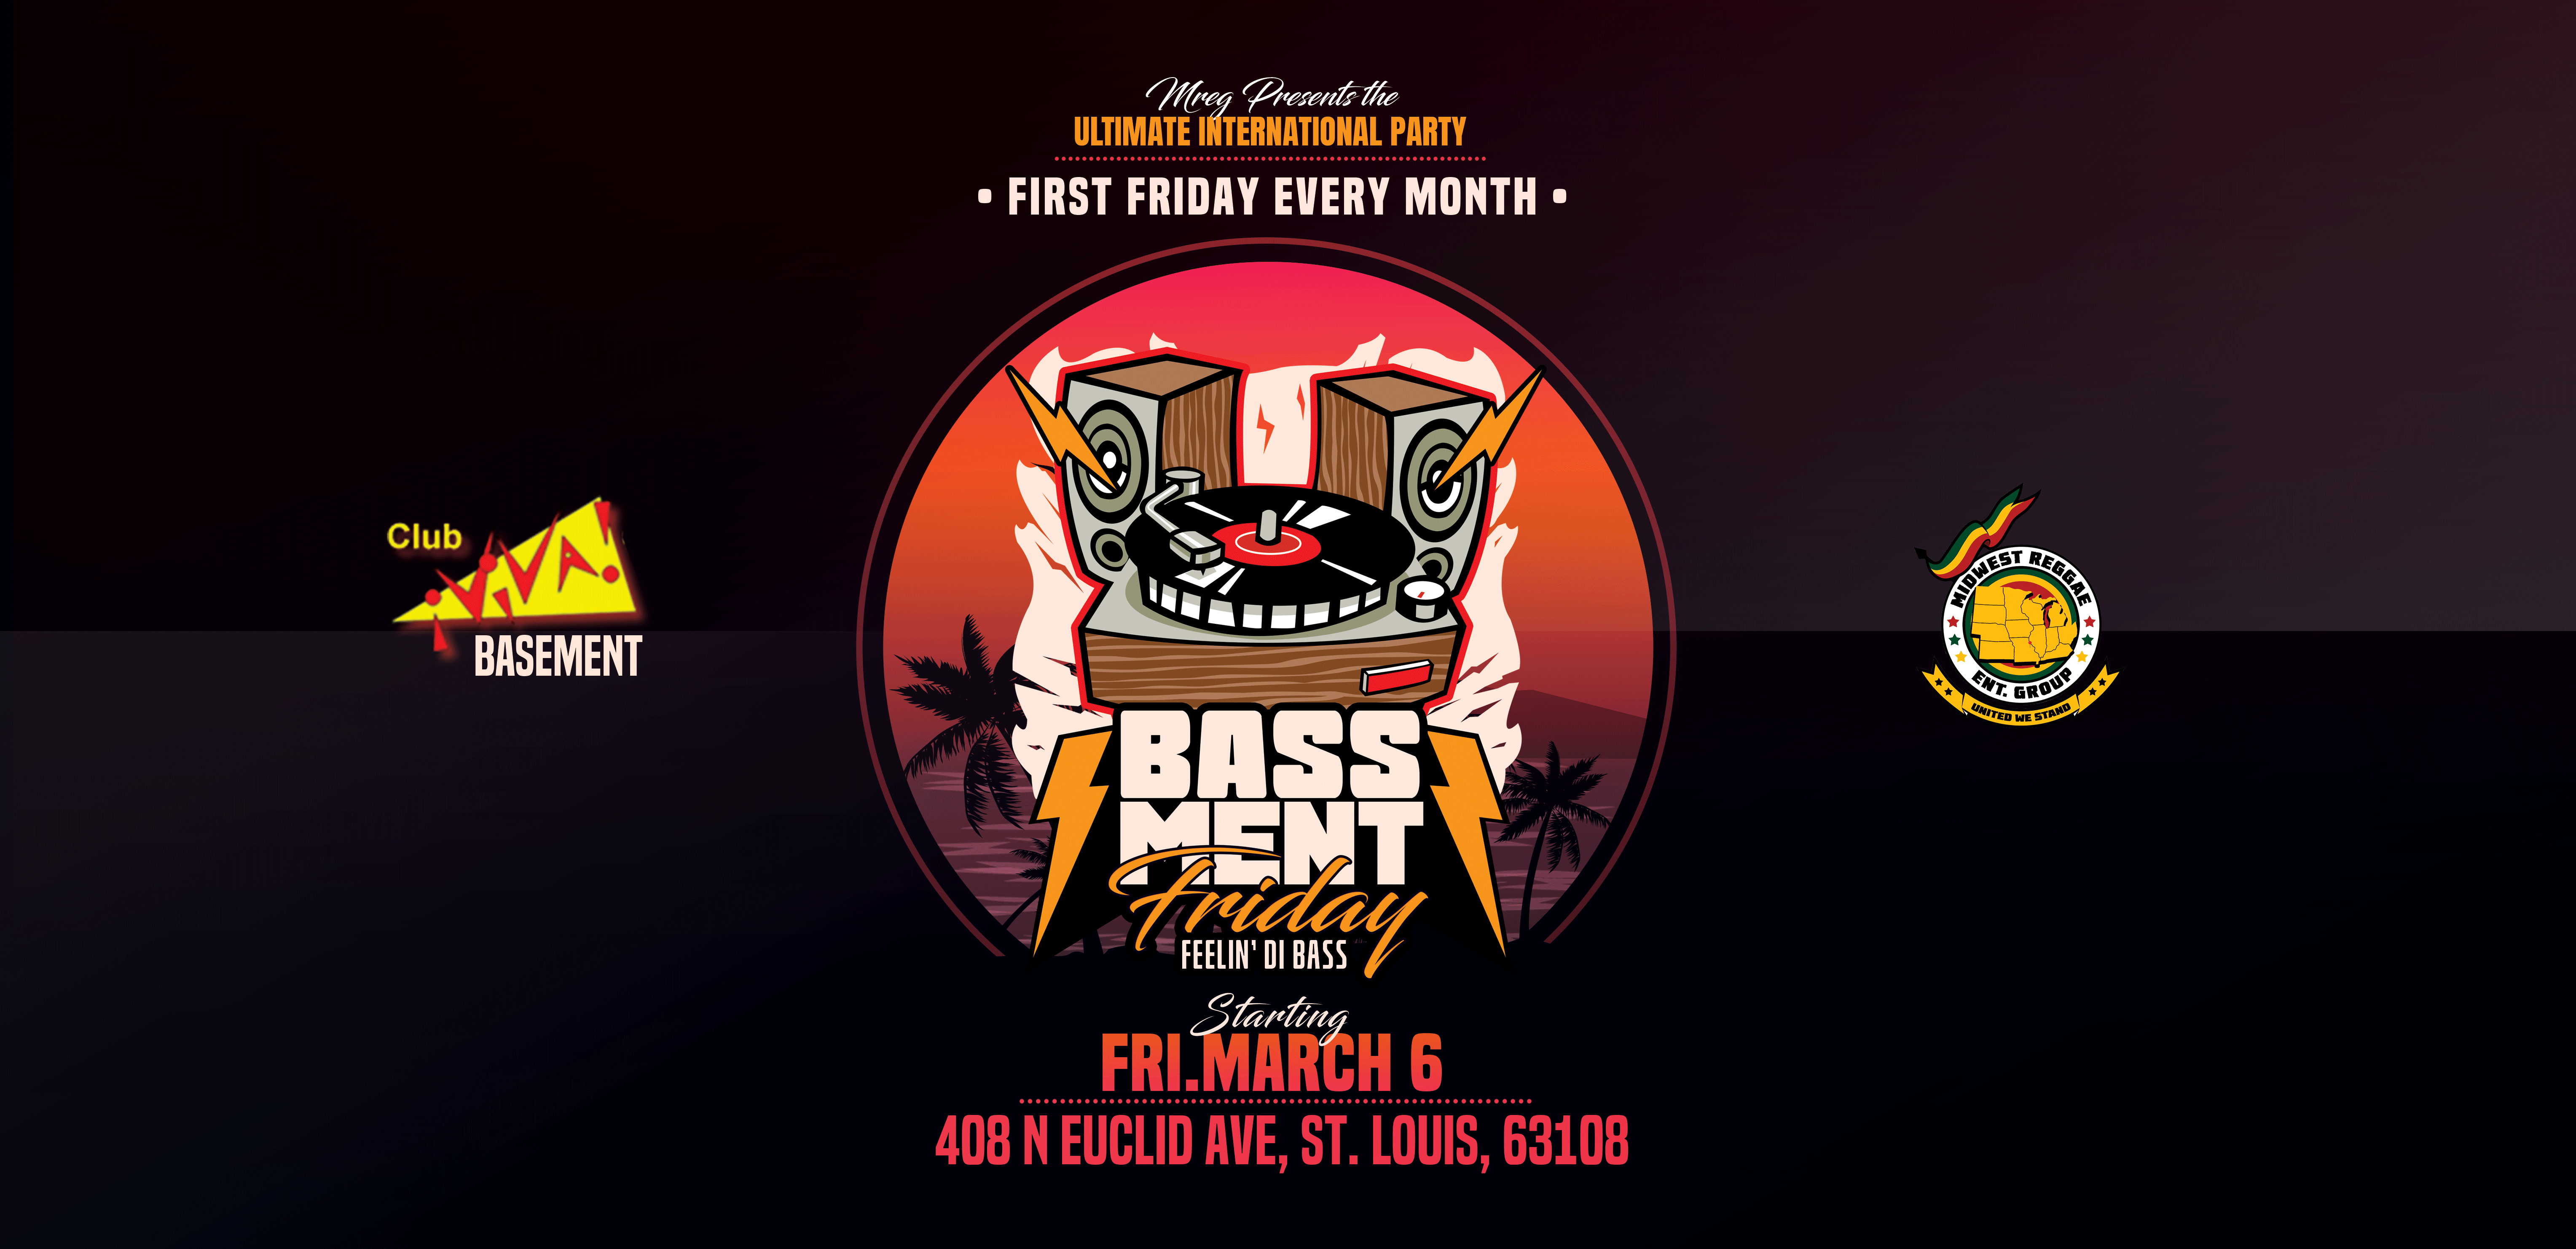 Bassment Friday (Intl. Party)